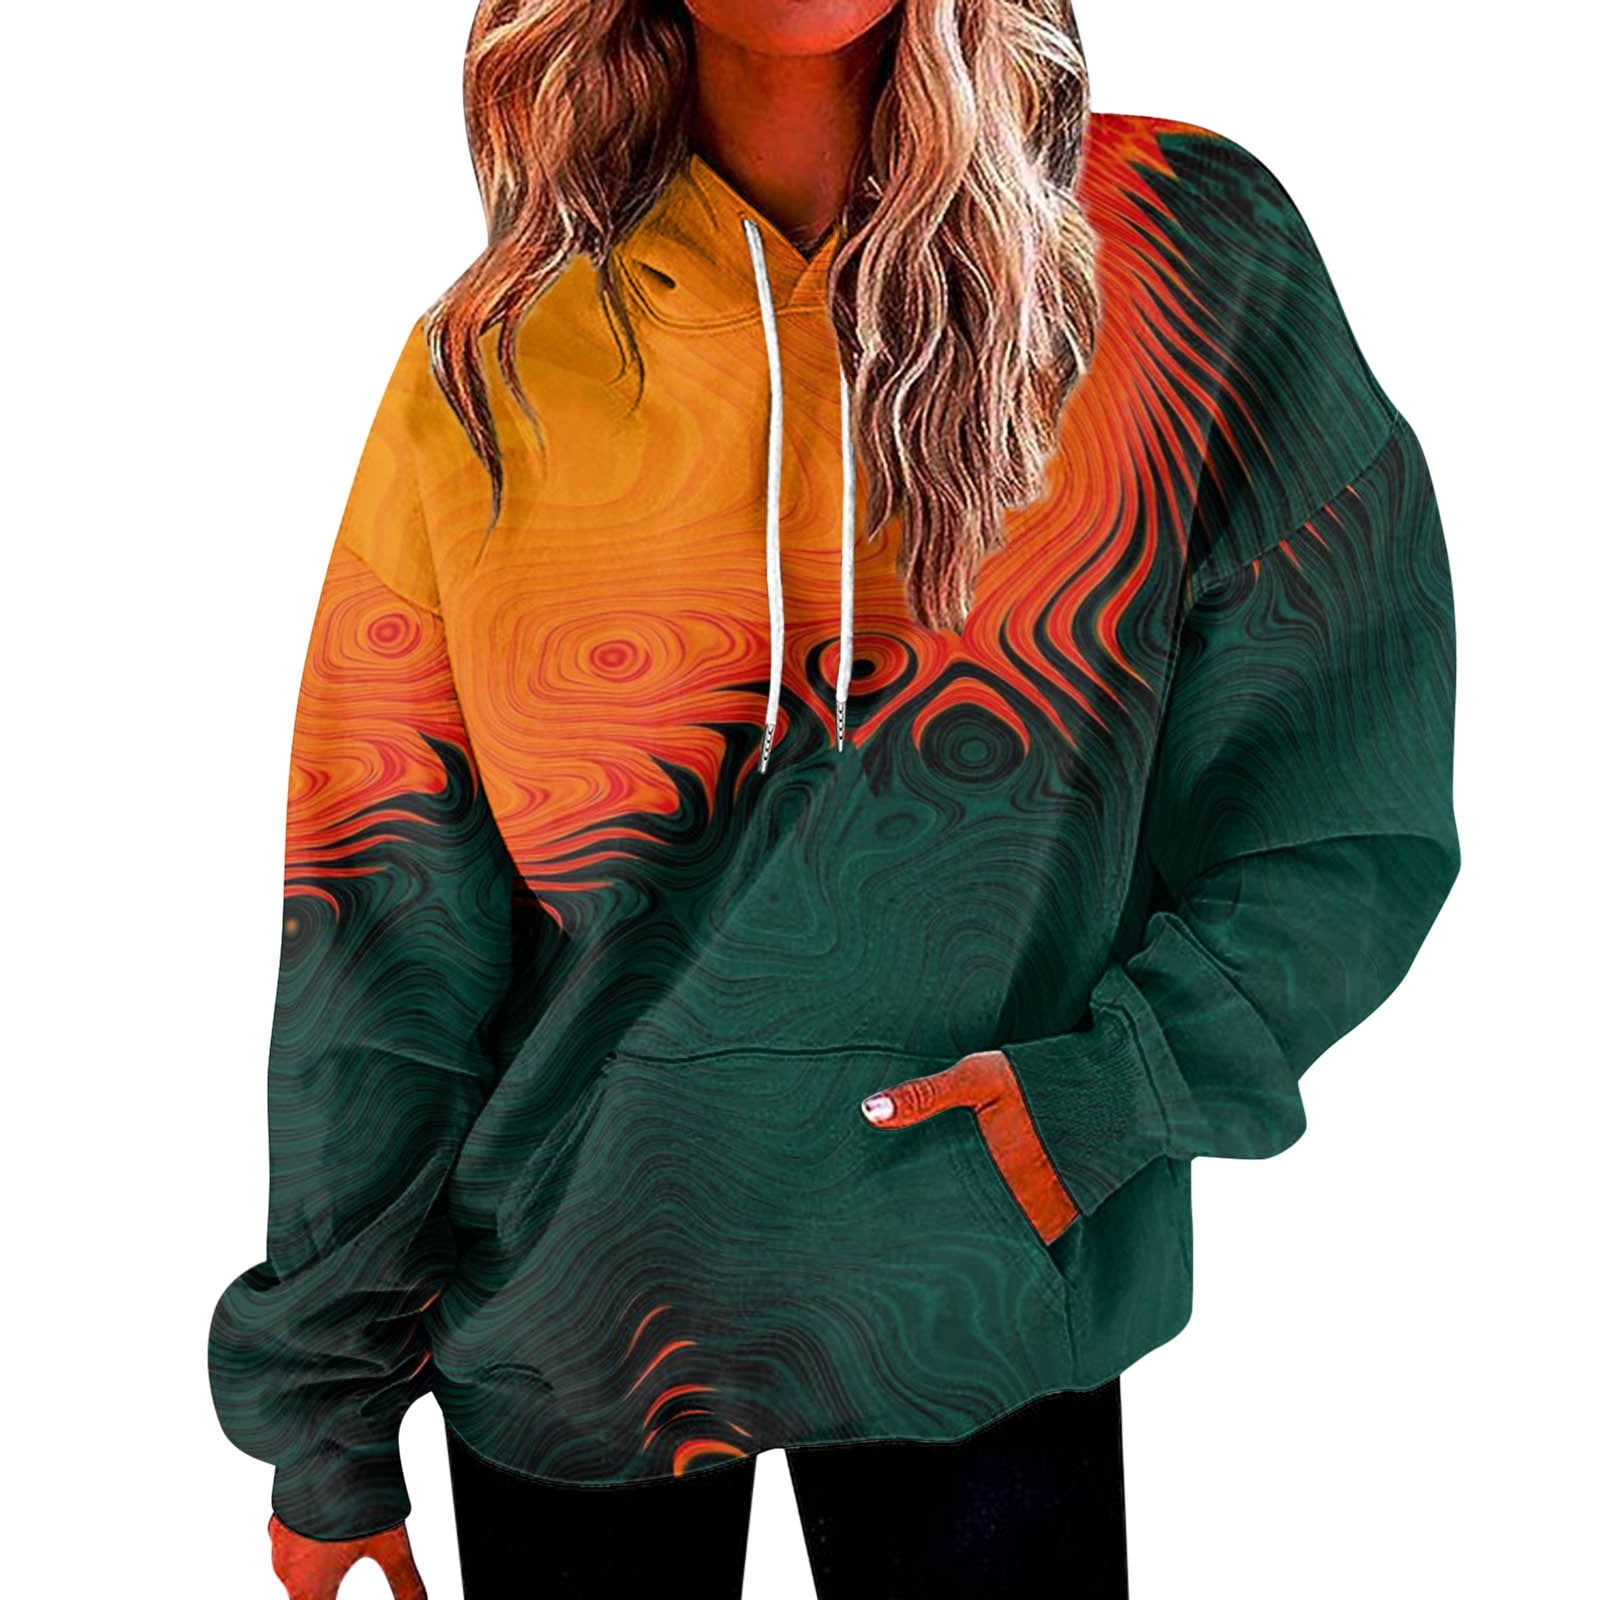 Zuwimk Womens Hoodies,Women's Pullover Sweater Hoodies Casual Button Up V  Neck Knitted Long Sleeve Hooded Sweaters Henley Tops Orange,S - Walmart.com